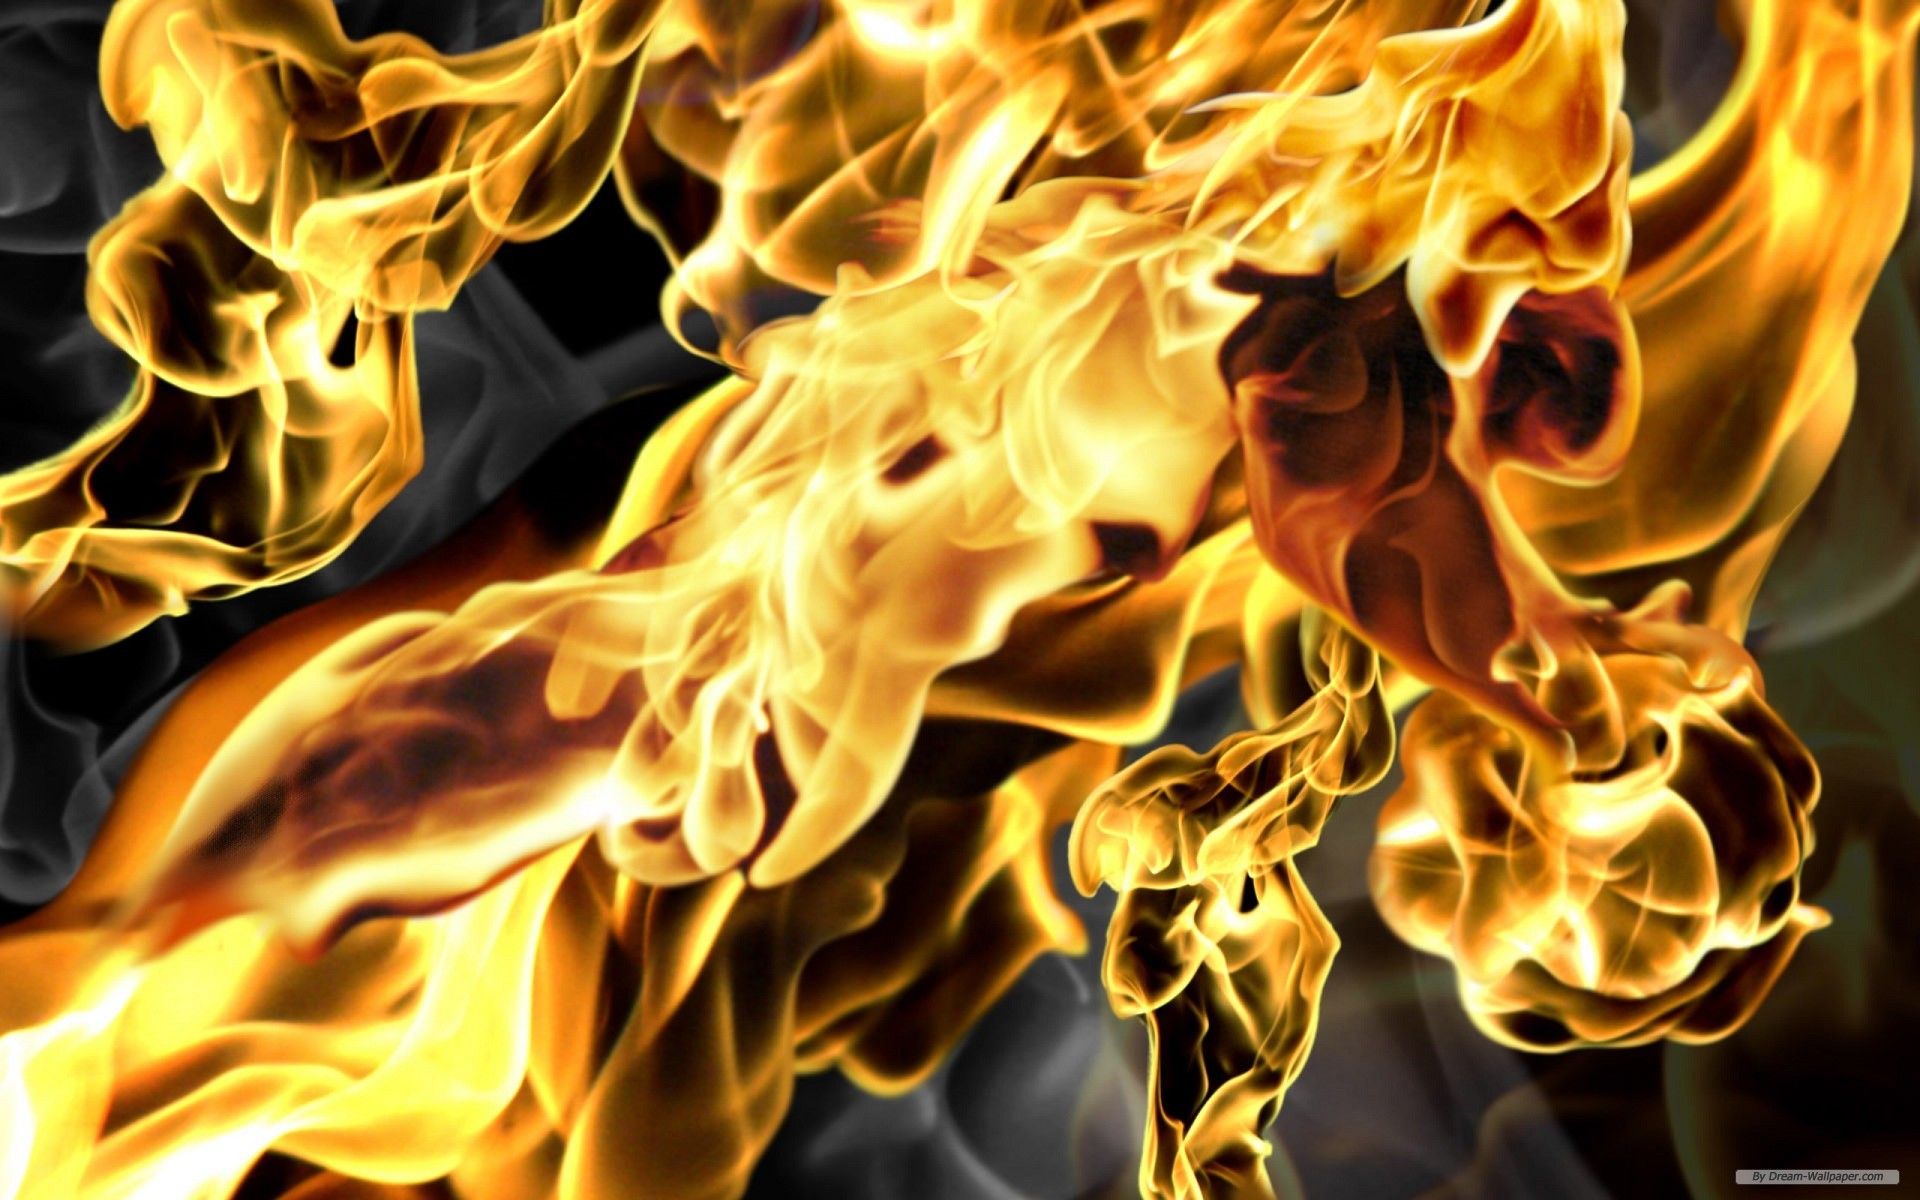 Free Wallpaper - Free Photography wallpaper - Close up flame 3